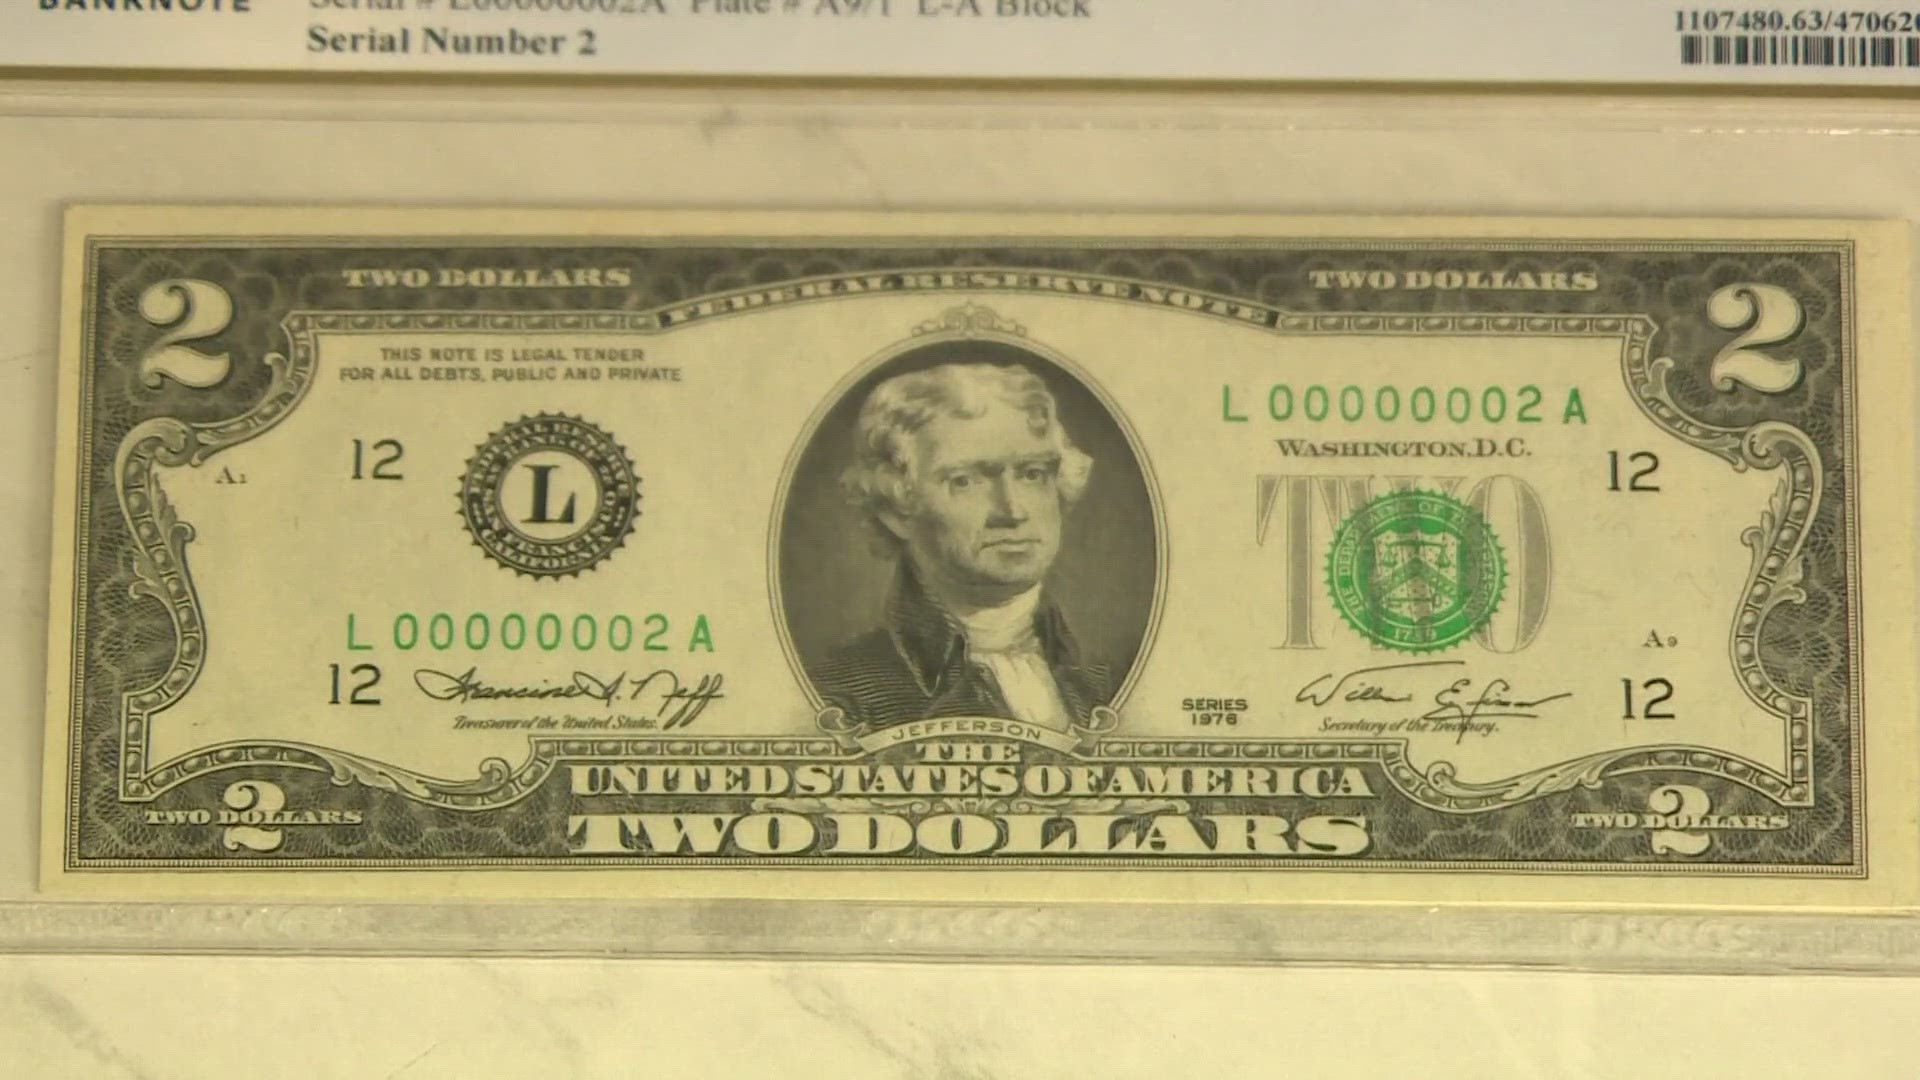 Heritage Auctions officials have some bad news-- not everyone will hit the jackpot when they pull out those old $2 bills you probably got from your grandma.